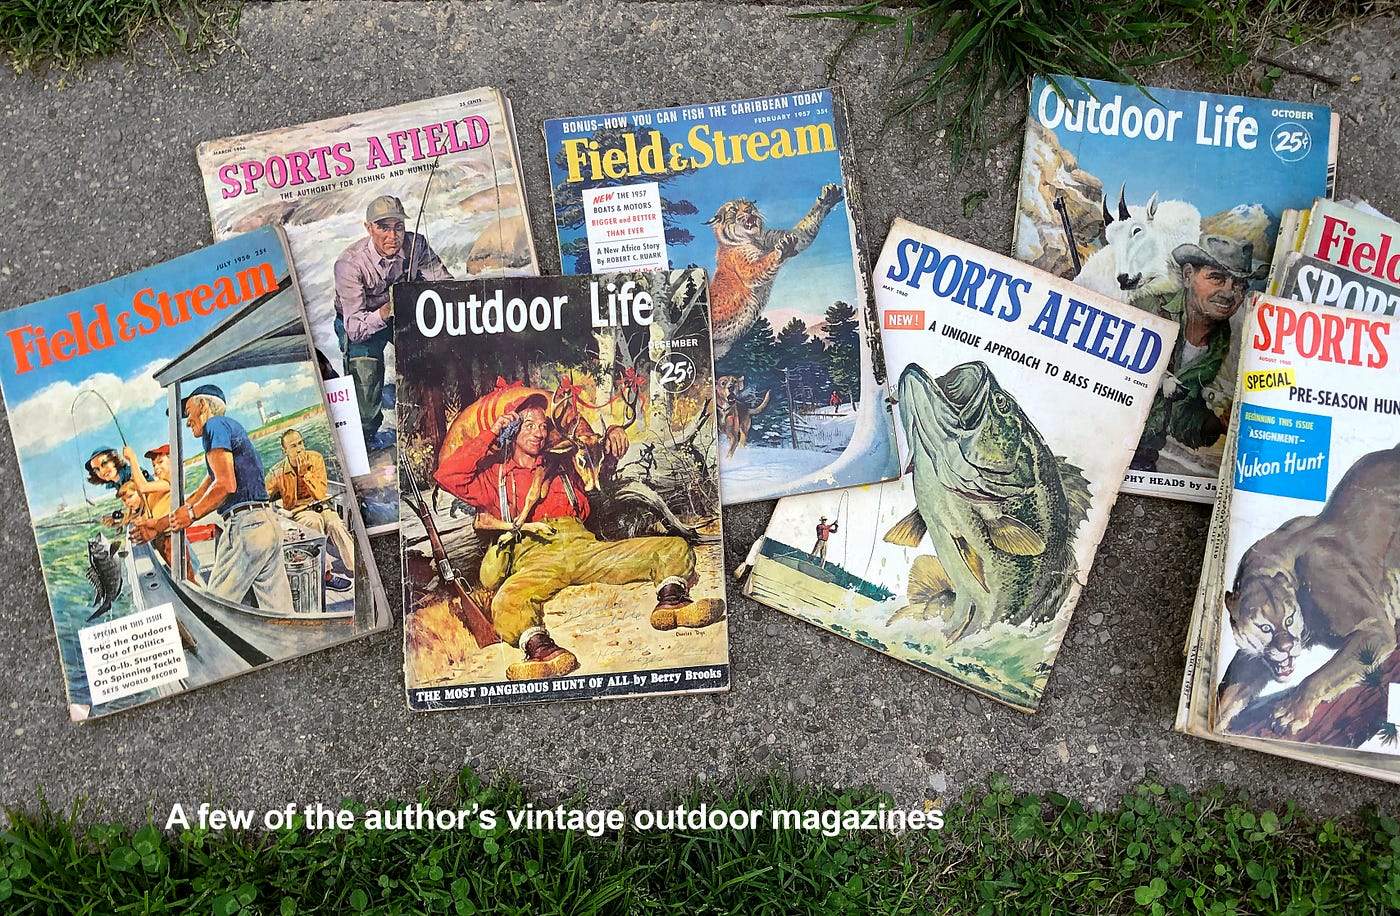 The Timeless Quality of Vintage Outdoor Magazines, by Robert E. Saunders, NOSTALGIACS